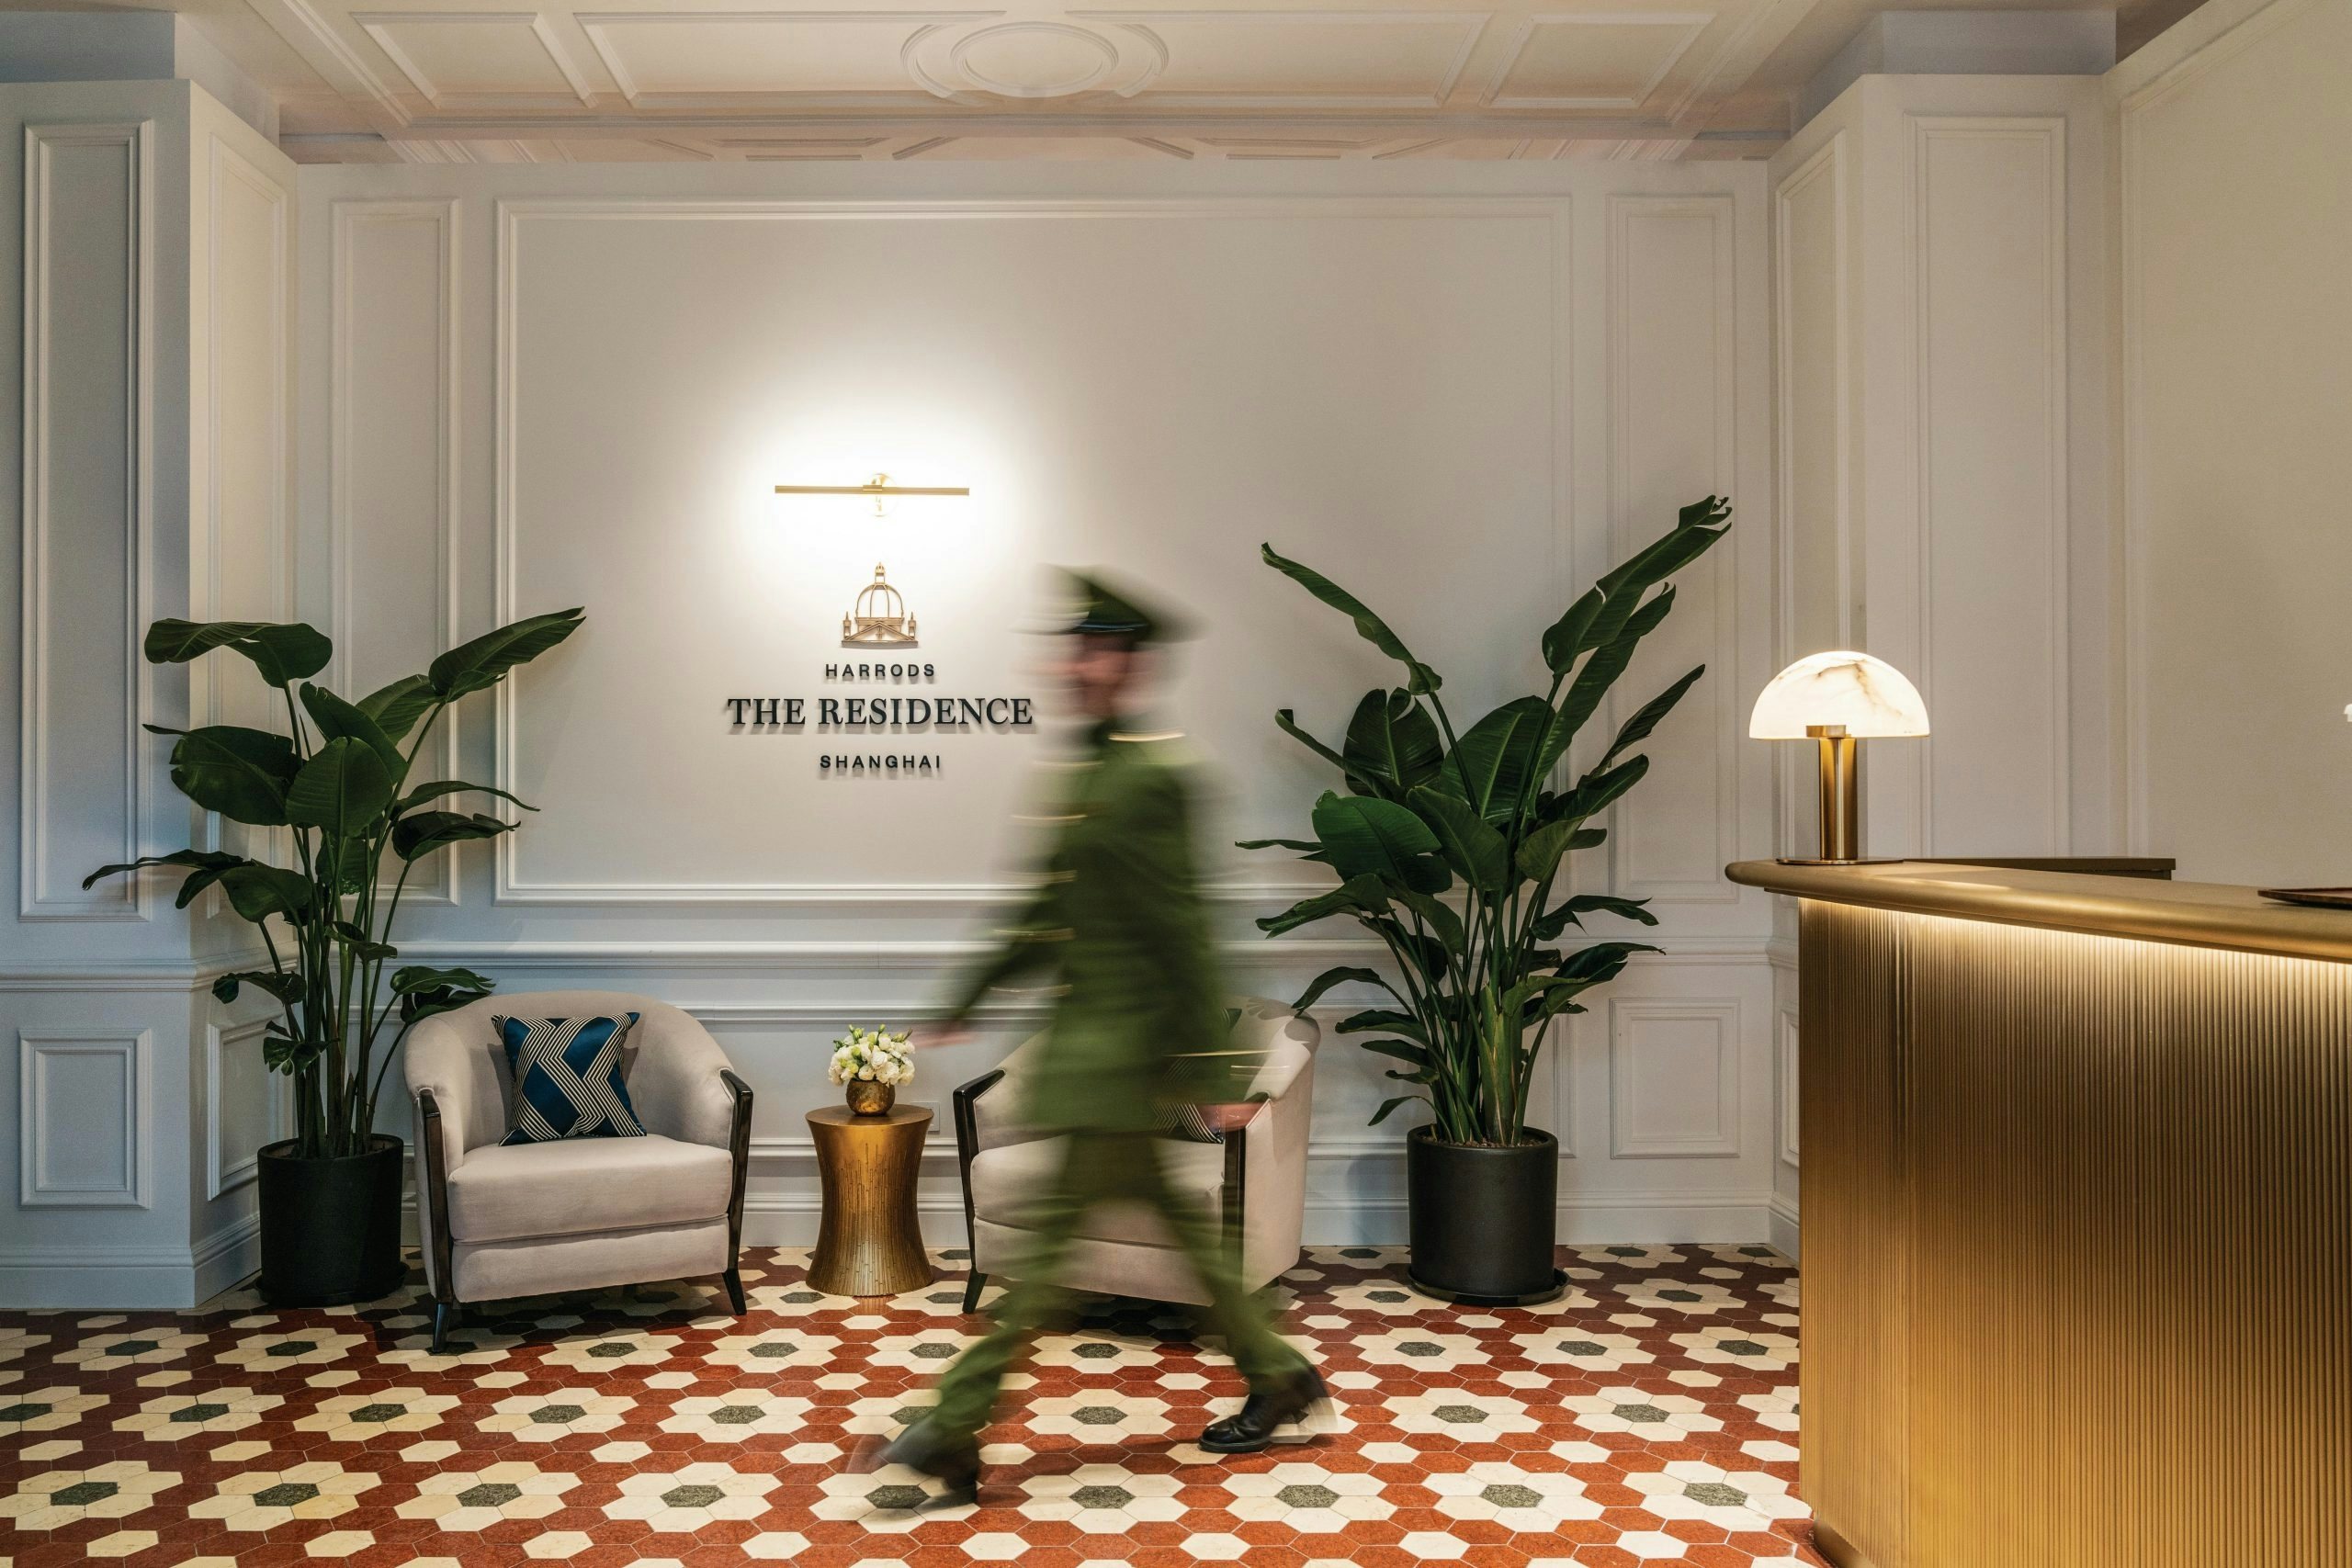 Seamlessly connecting to its Chinese consumers in the mainland, Harrods' The Residence in Shanghai is now a private member's club. Photo: Harrods